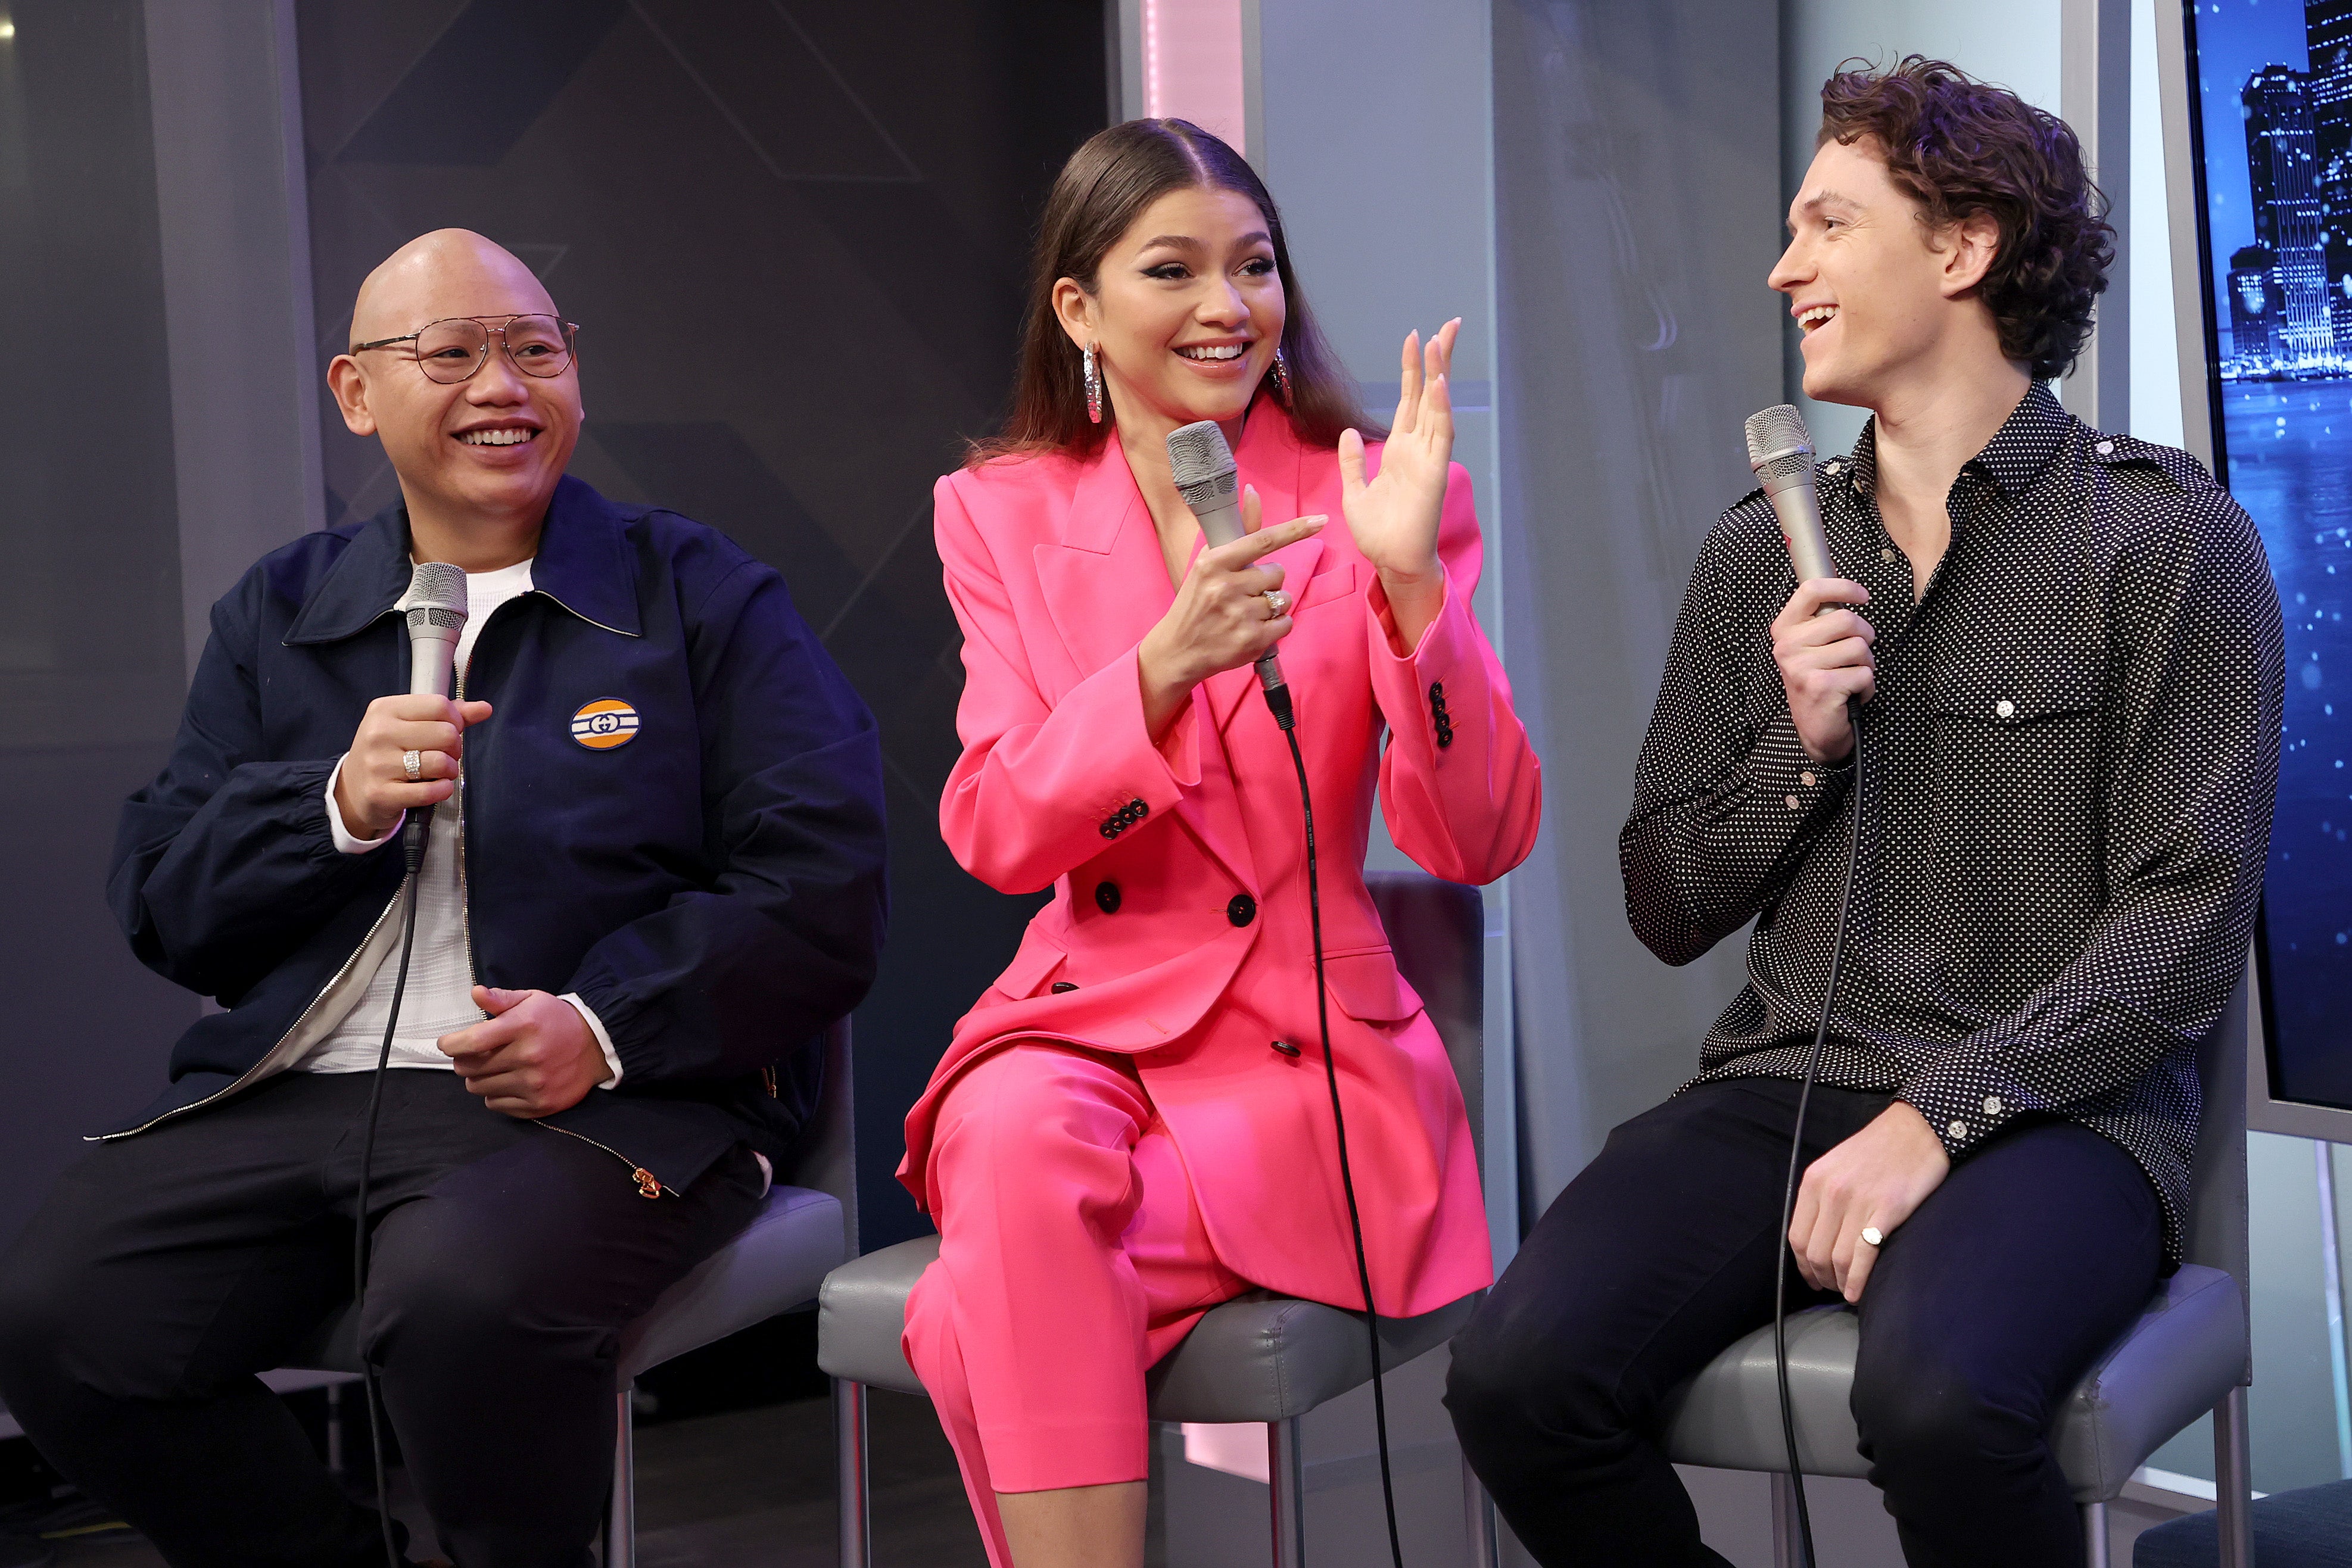 Zendaya wears the Bulgari ring while doing press for Spider-Man: No Way Home in December 2021